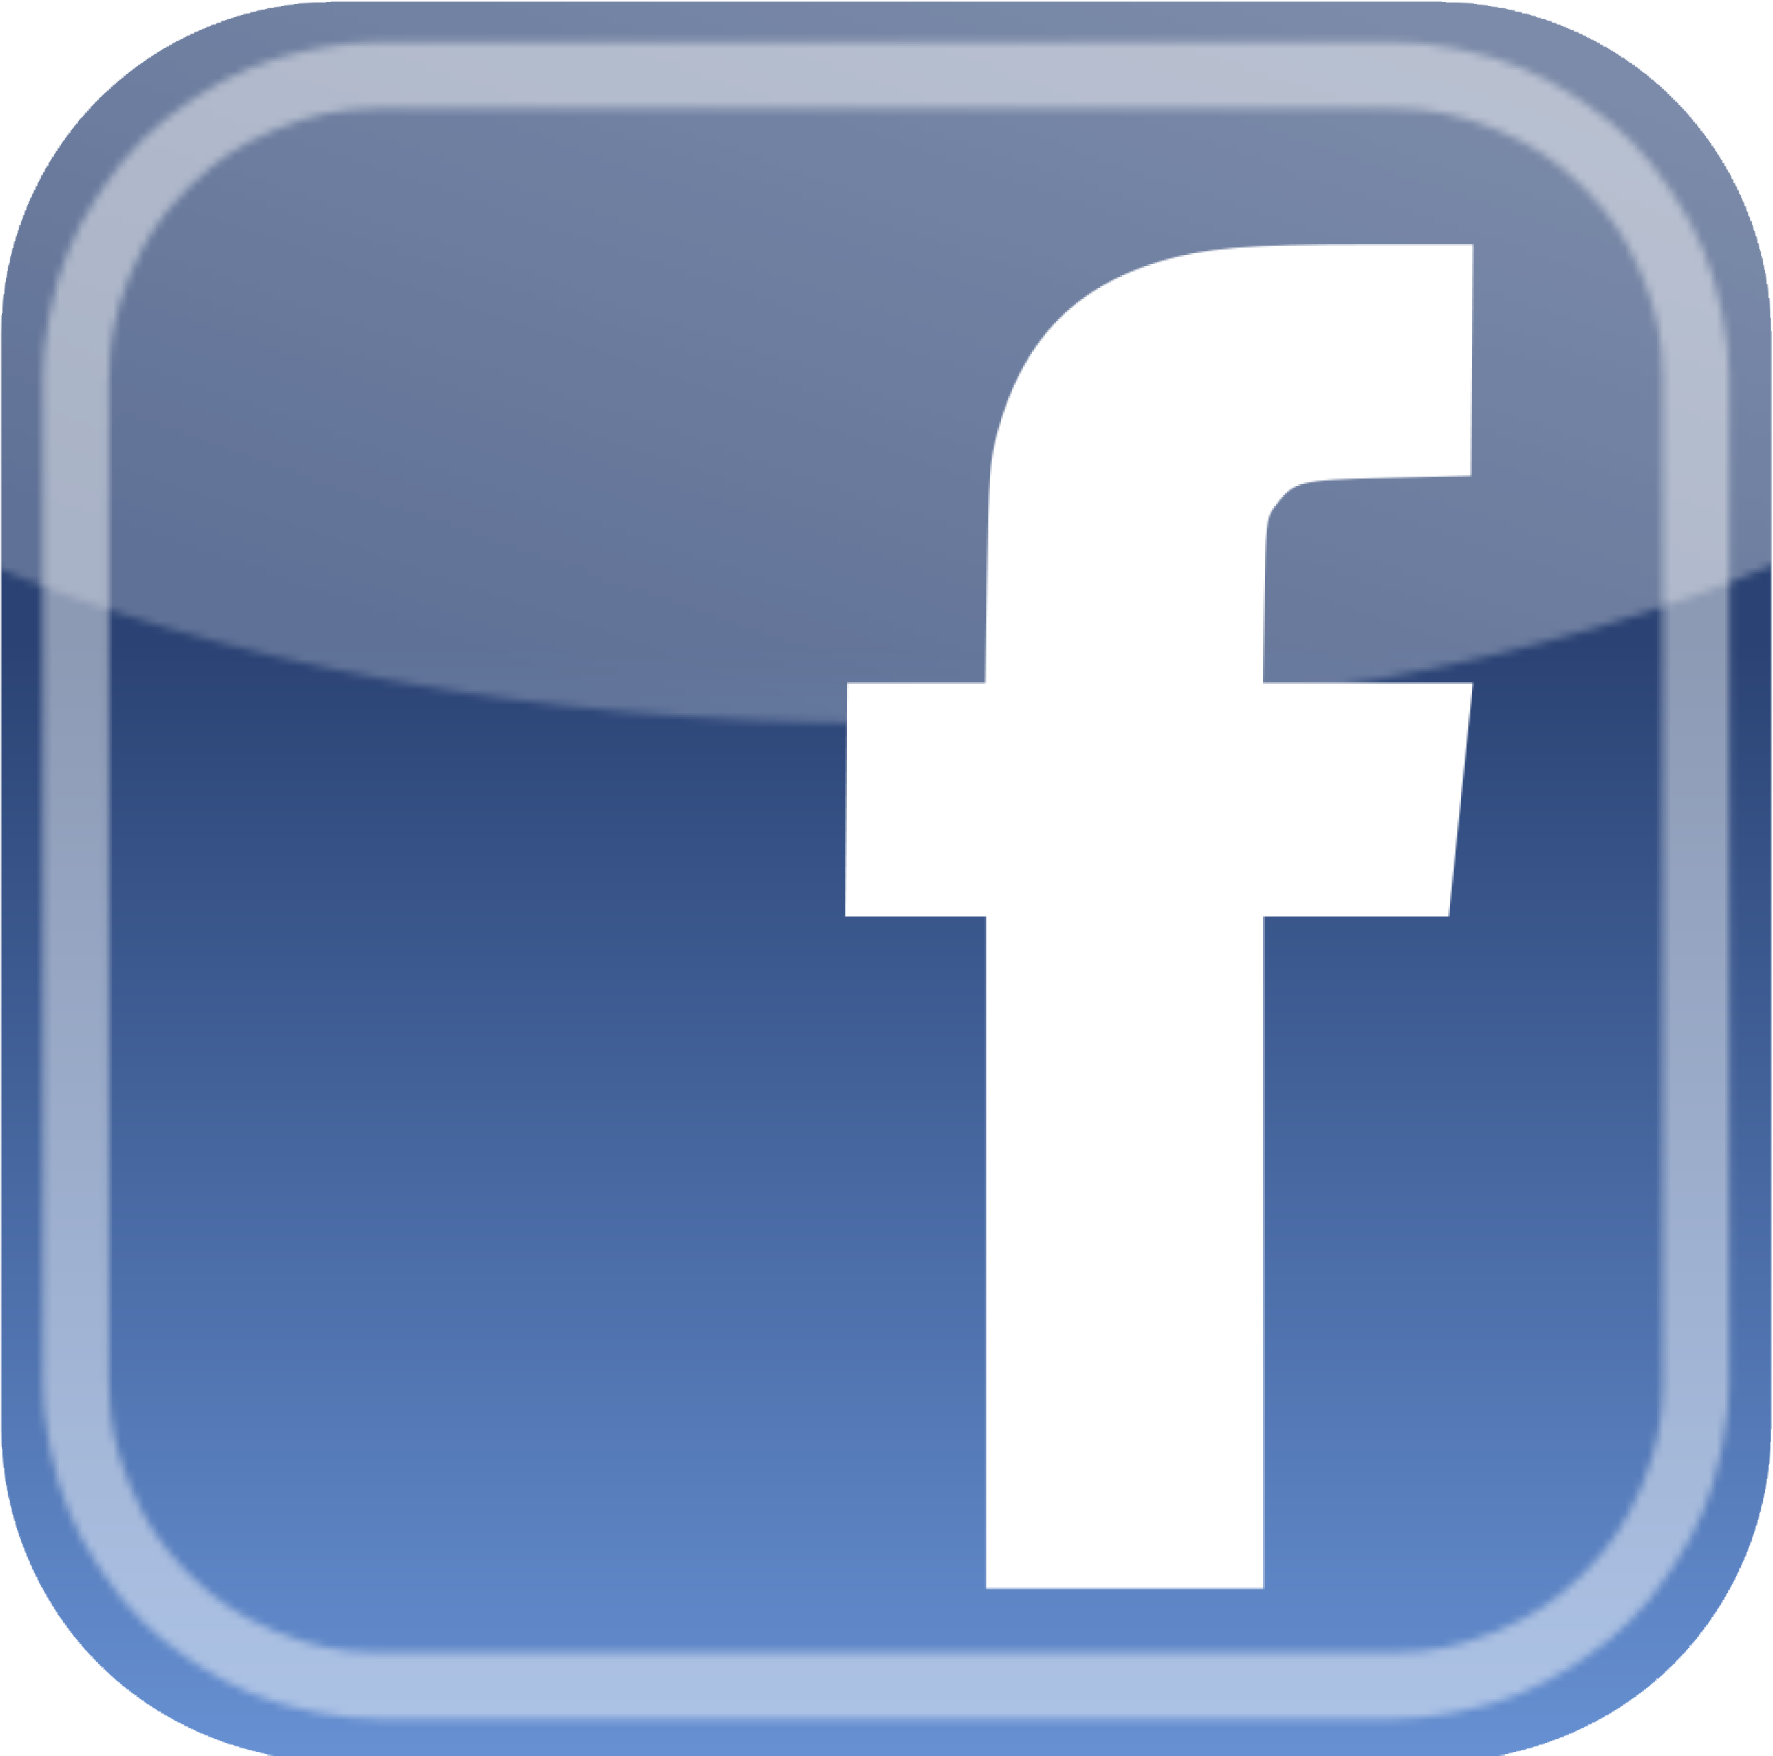 Our Facebook page